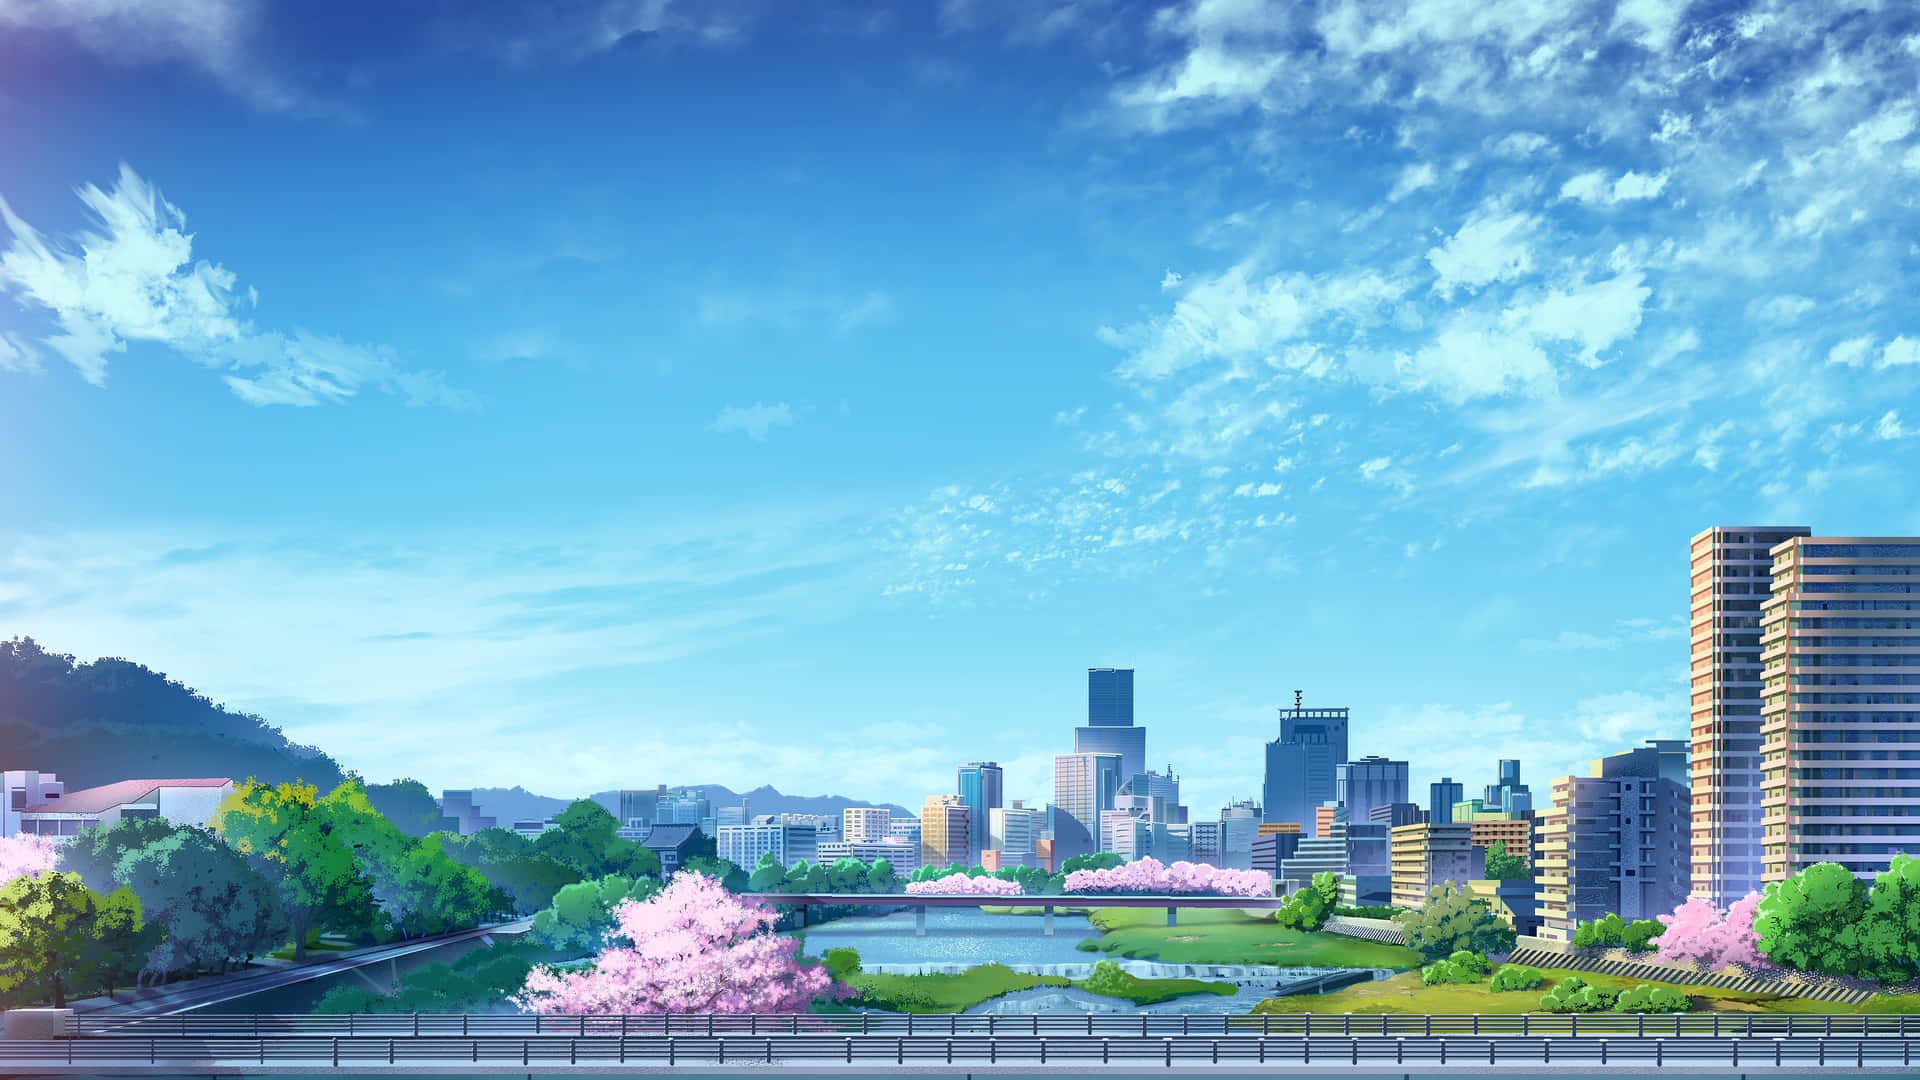 Discover the magical and vibrant Anime City, available for all to explore!